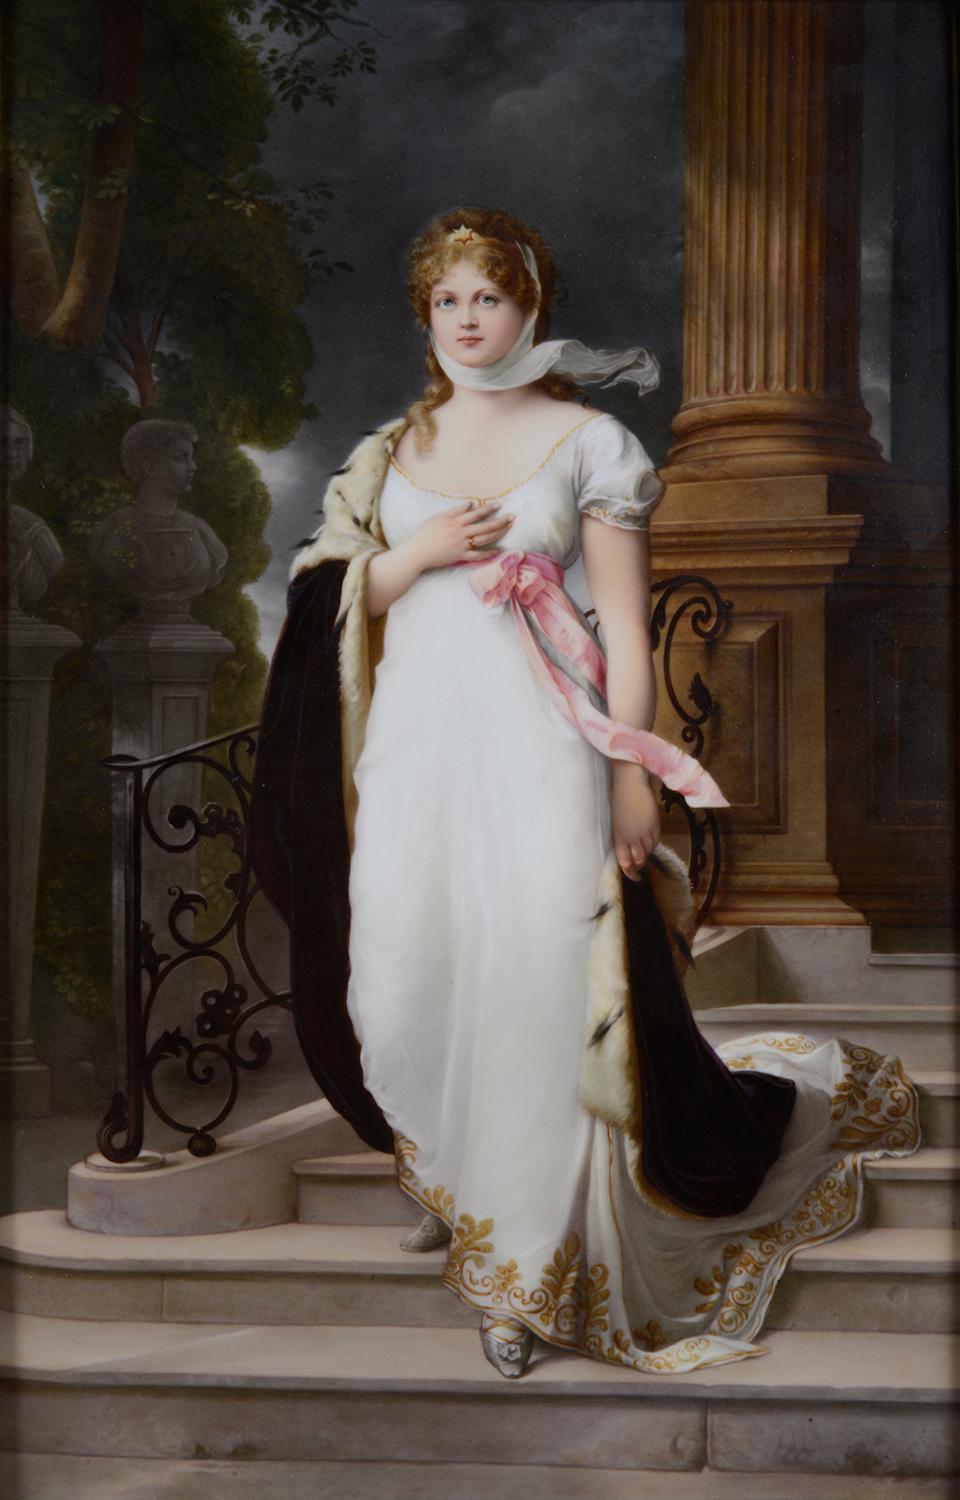 This beautiful KPM porcelain plaque replicates an extremely famous painting of Louise of Mecklenburg-Strelitz, the celebrated 19th century Prussian Queen.

The subject of this portrait is the Duchess Louise of Mecklenburg-Strelitz (1776-1810), the